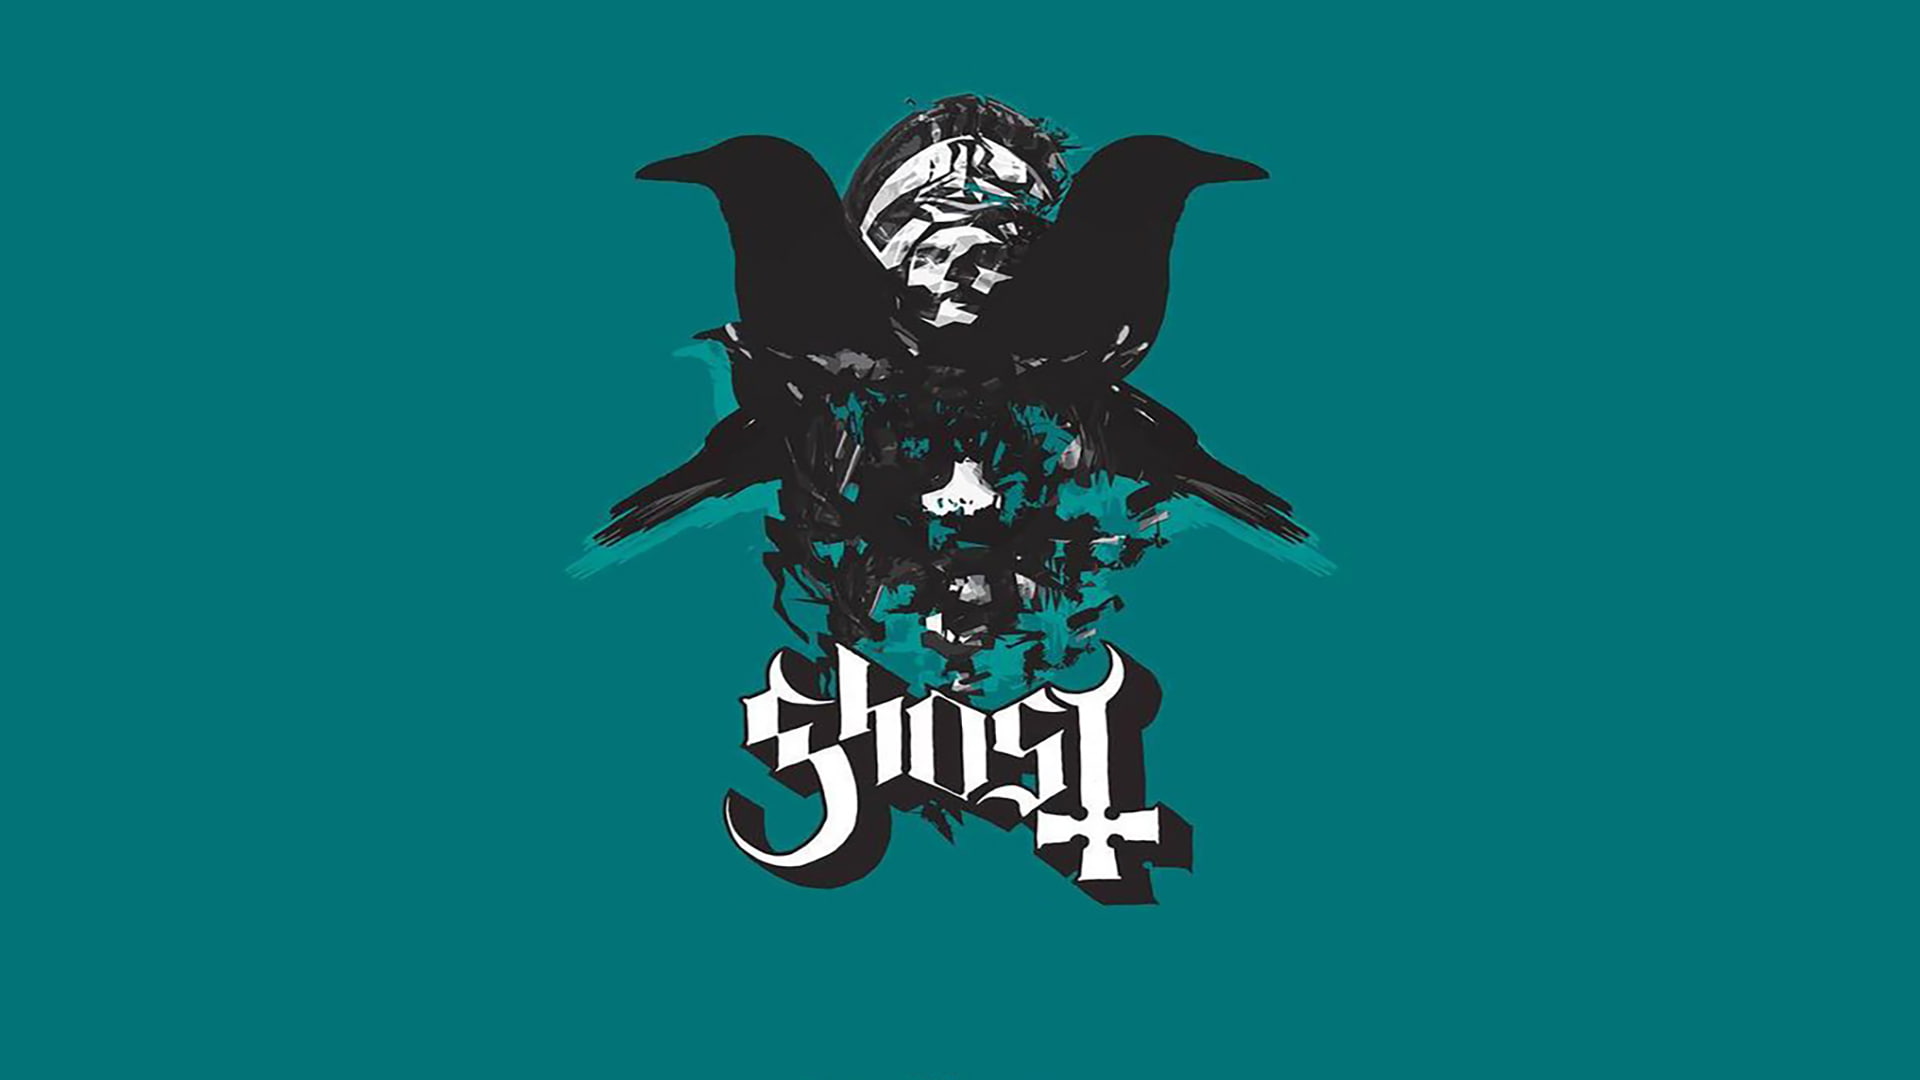 Ghost Bc Concert Poster - HD Wallpaper 